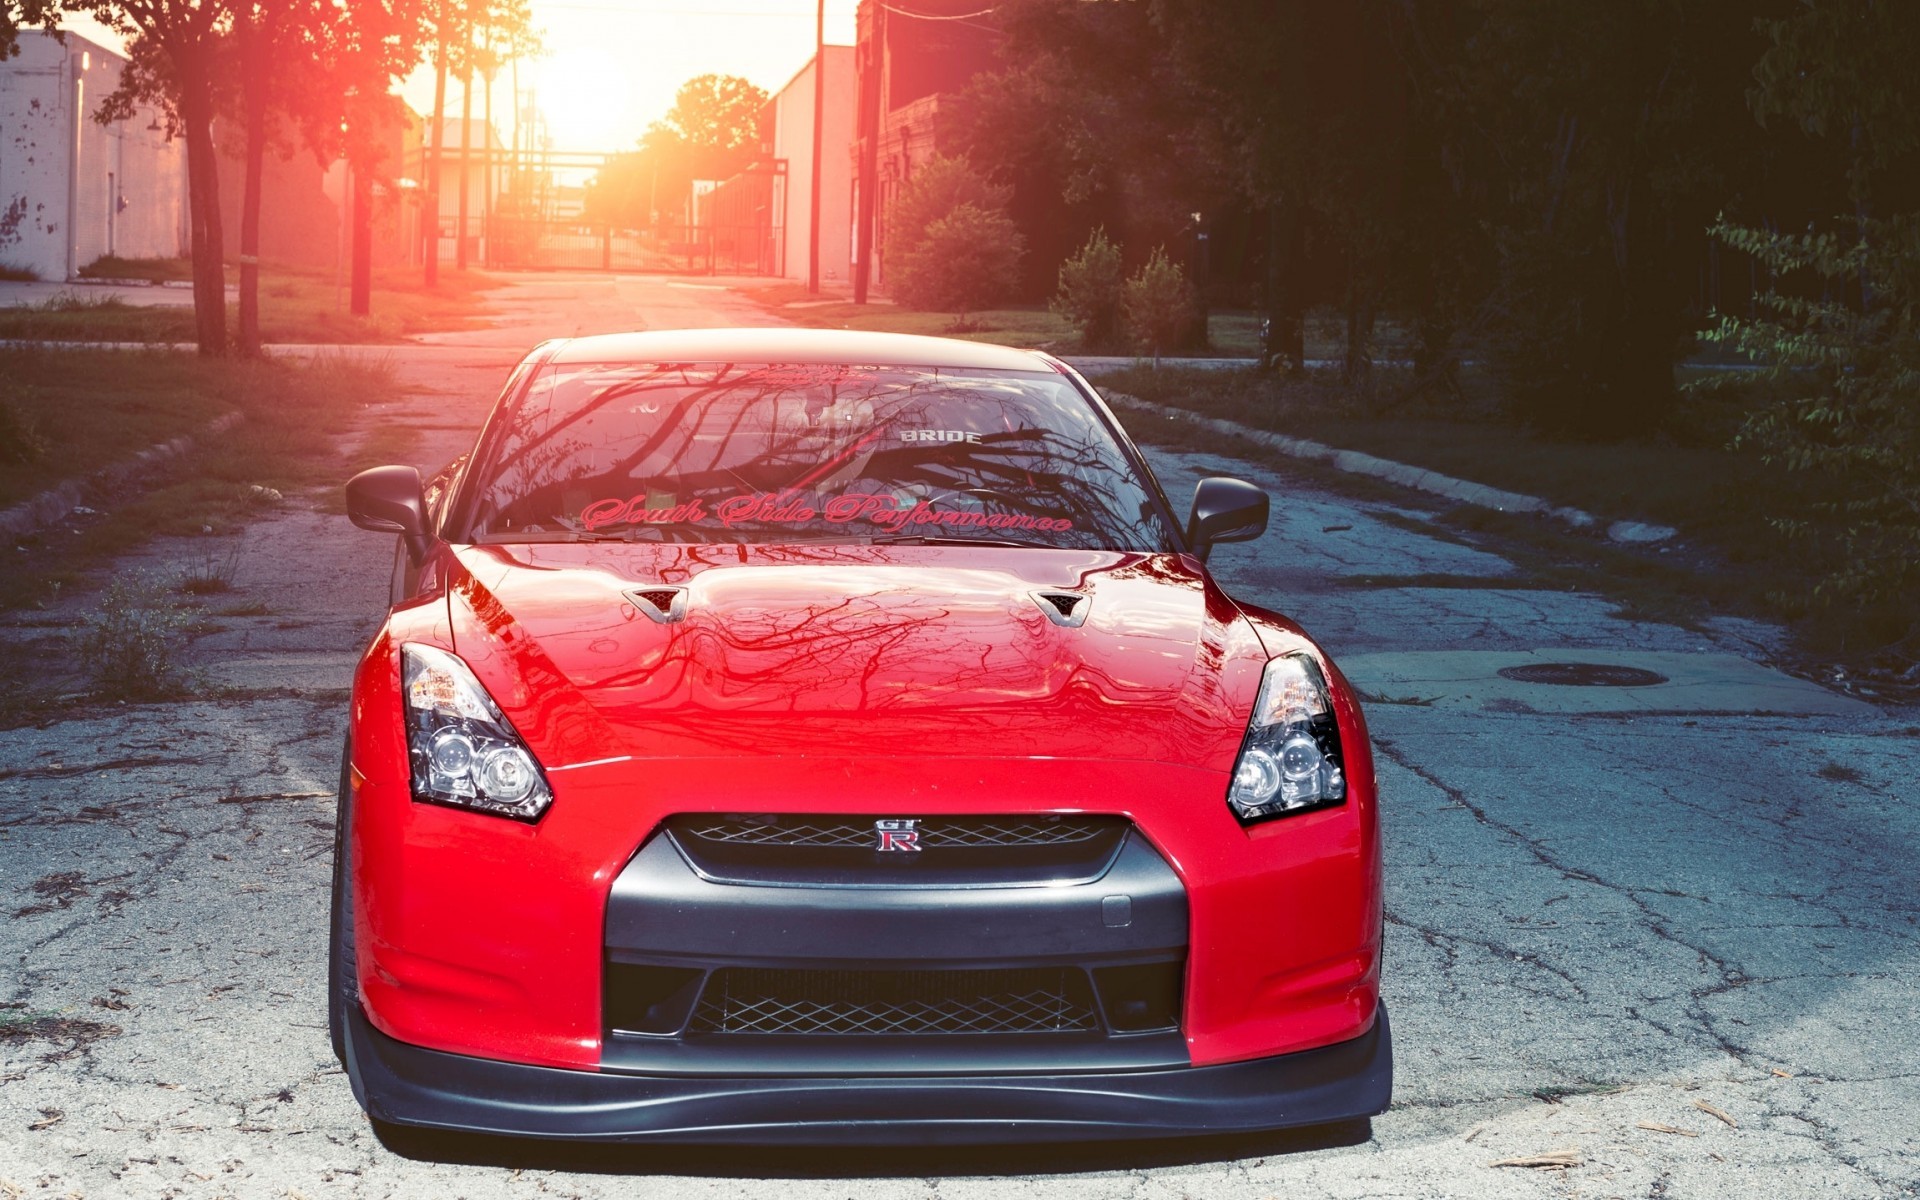 General 1920x1200 car Nissan road Nissan GT-R street red cars vehicle Japanese cars